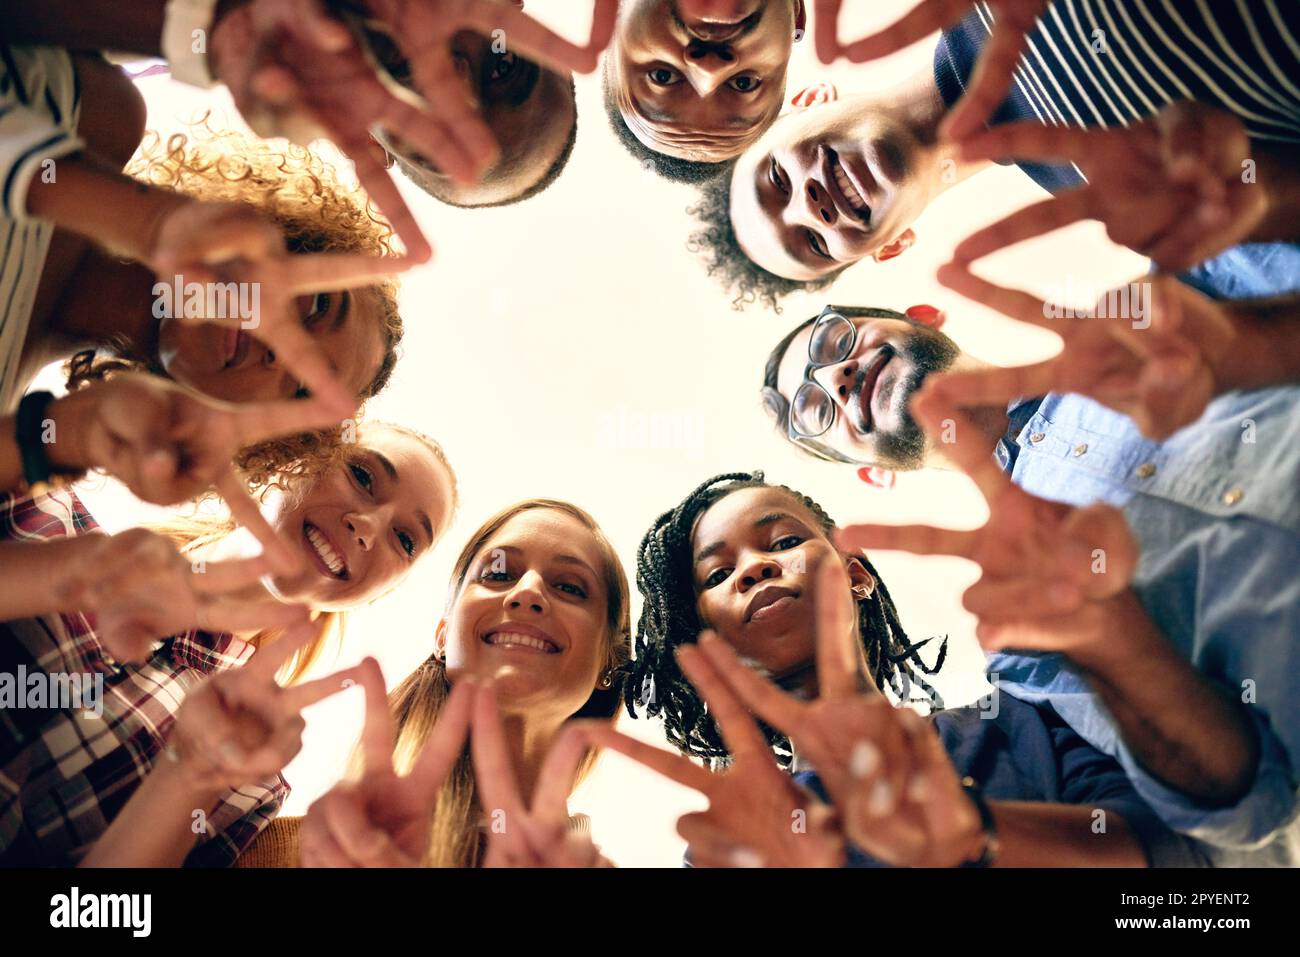 Nothing but peace and love. Low angle shot of a group of people joining their hands together. Stock Photo